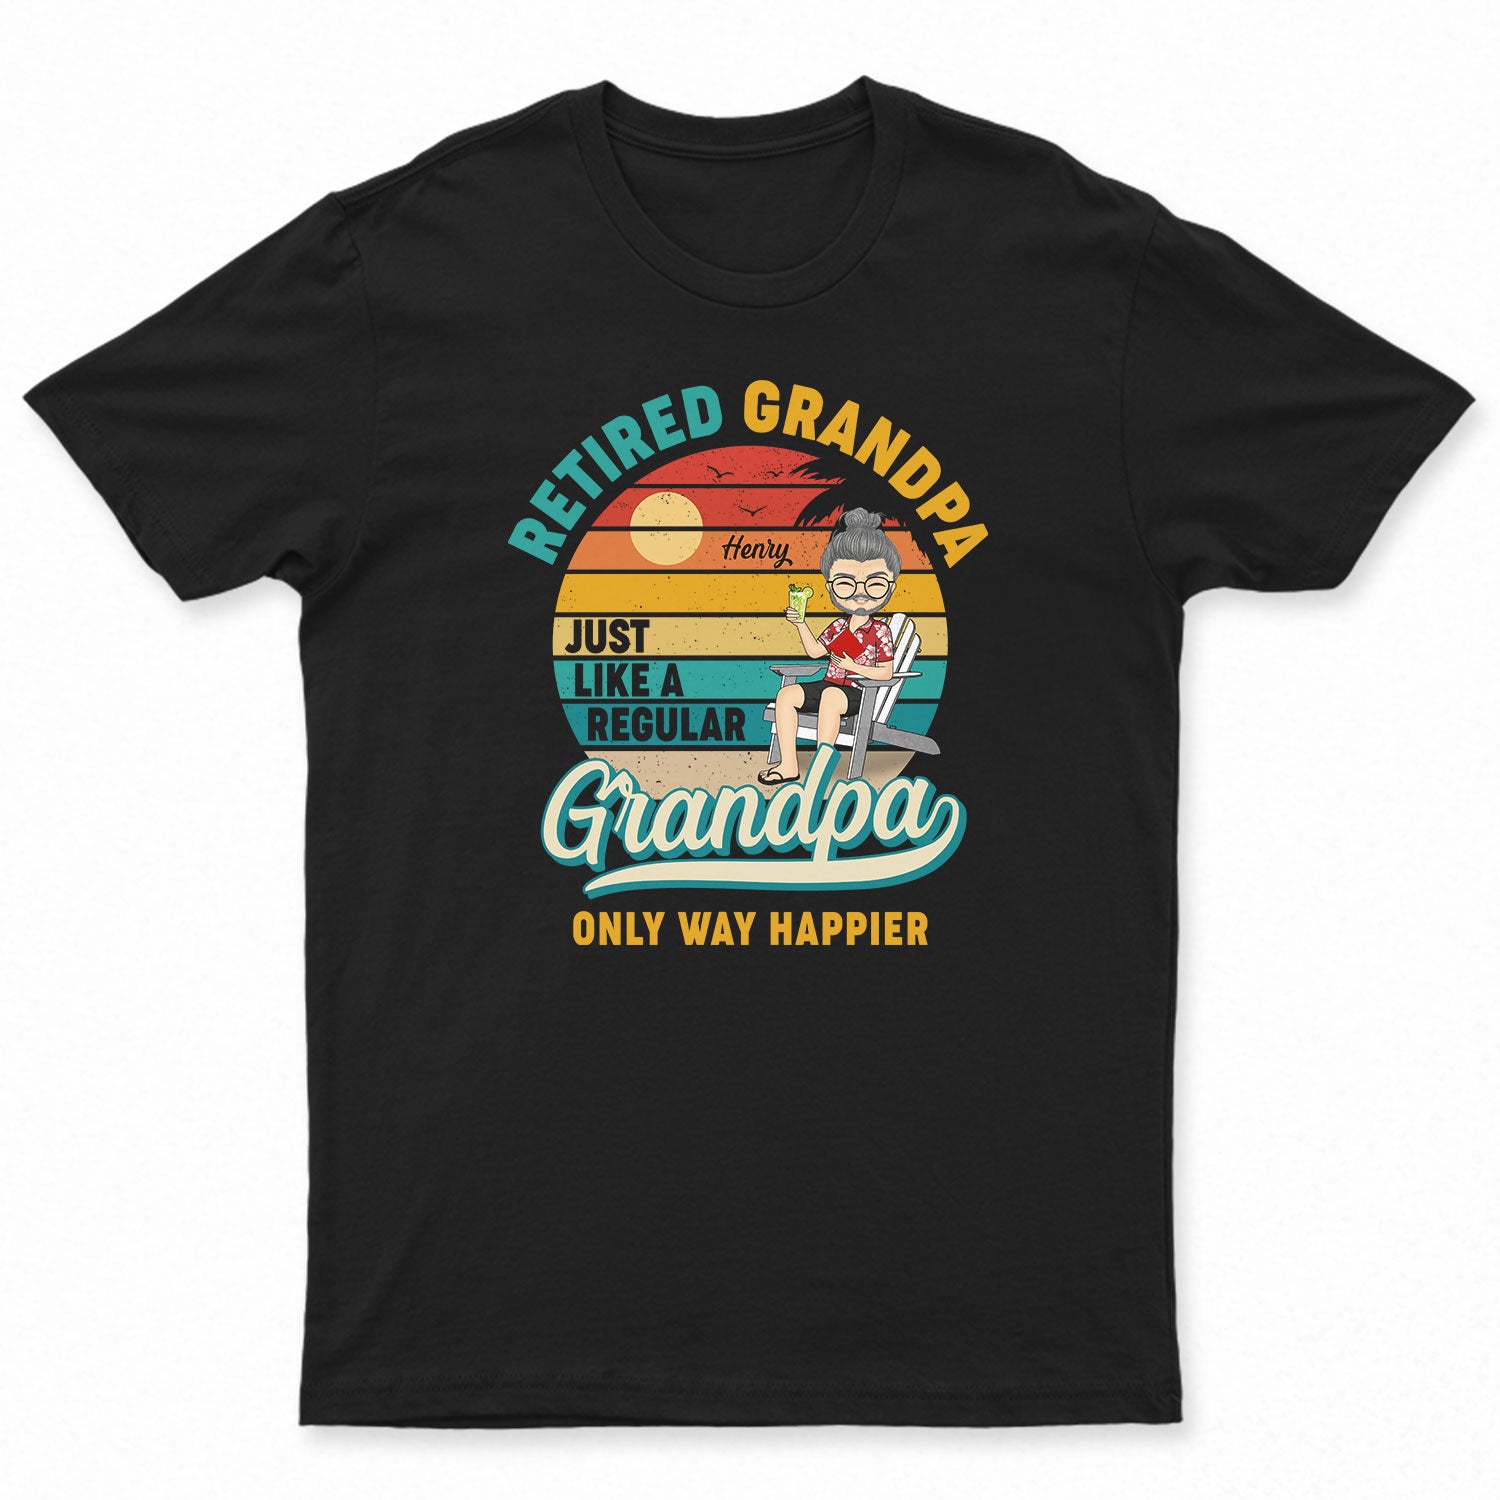 Only Way Happier - Retirement Gift For Father, Grandpa, Uncle - Personalized Custom T Shirt